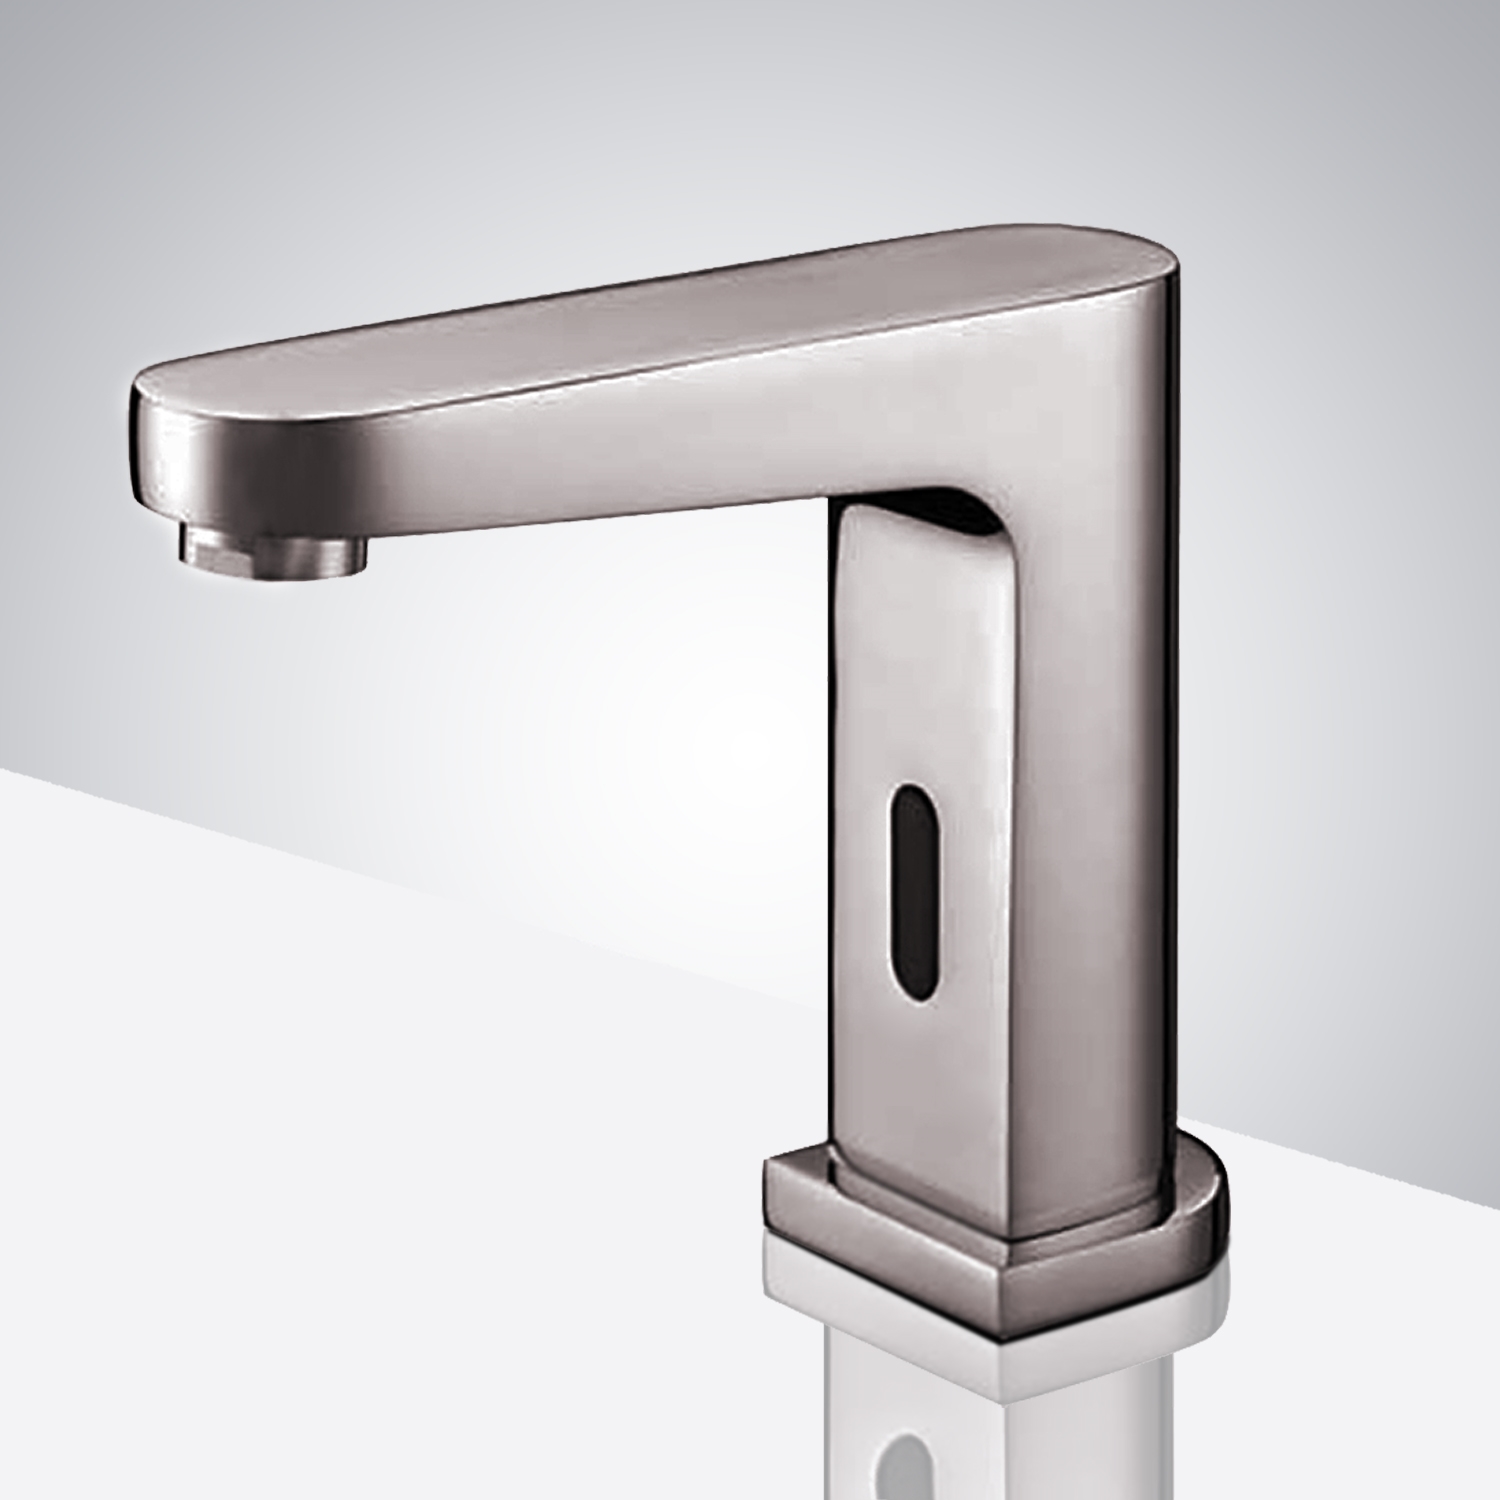 Hagios Commercial Automatic Brushed Nickel Finish Sensor Faucet